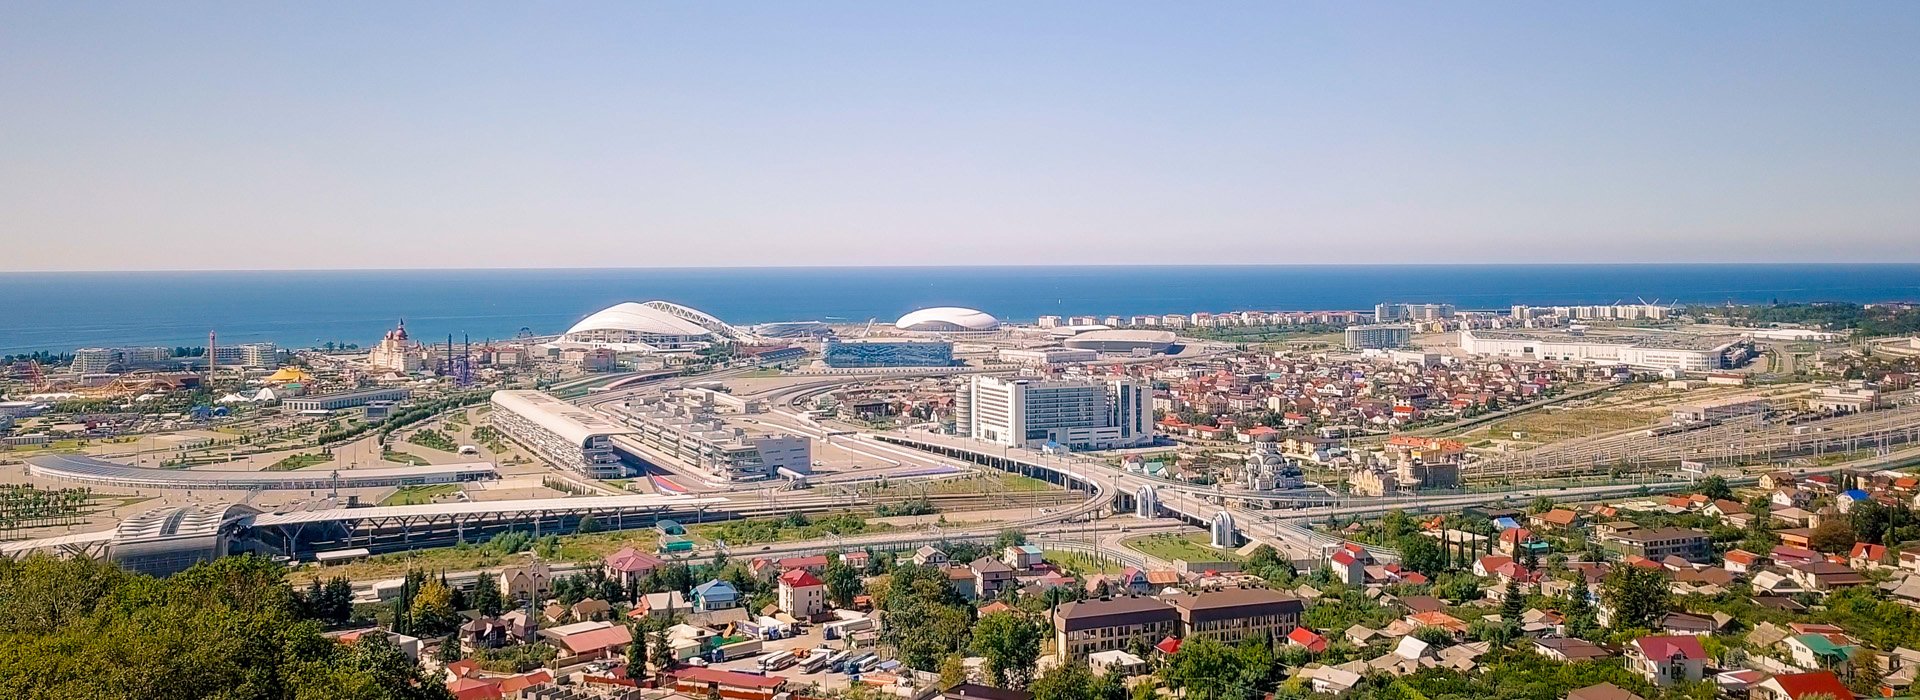 Sochi Shifting Into High Gear This September